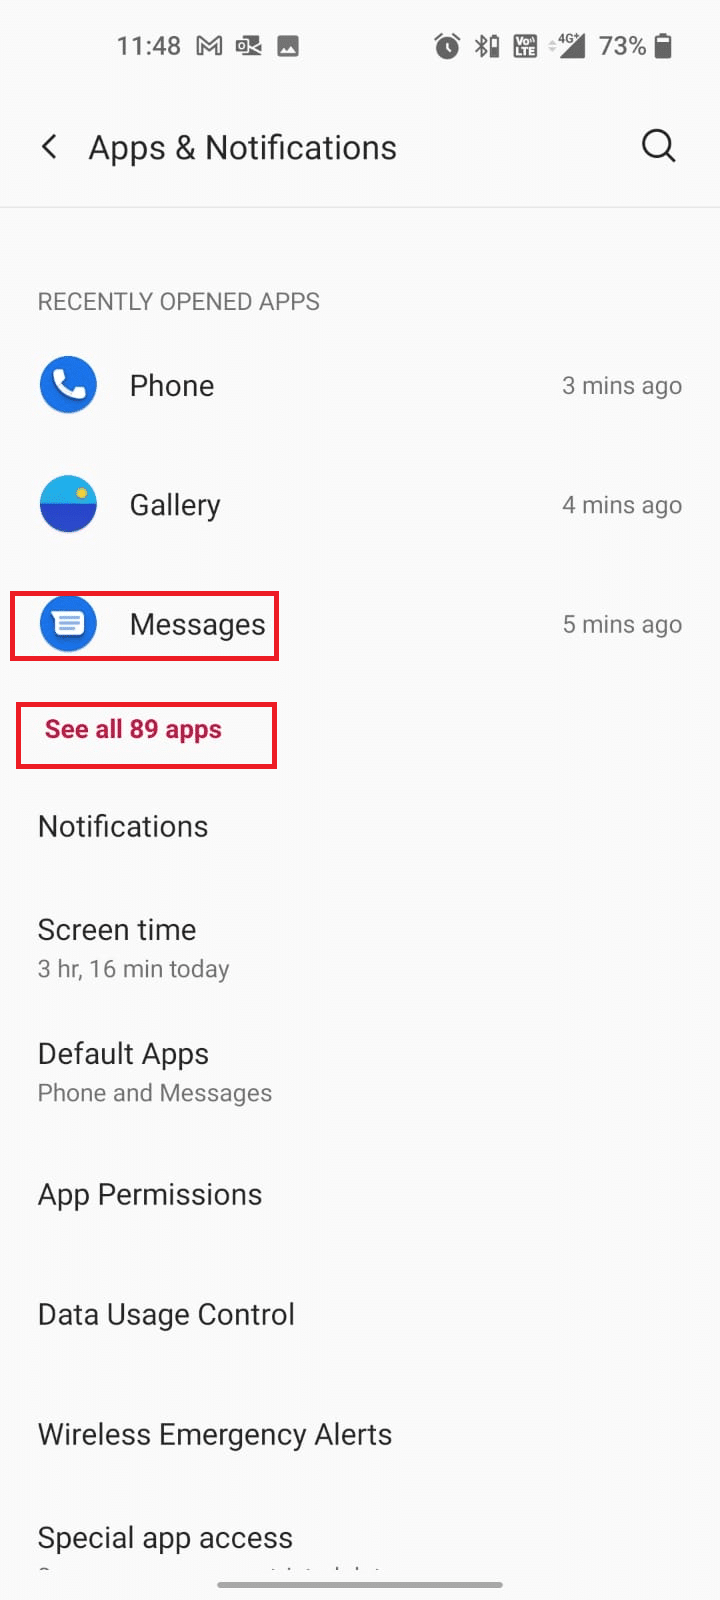 Messages app in RECENTLY OPENED APPS section